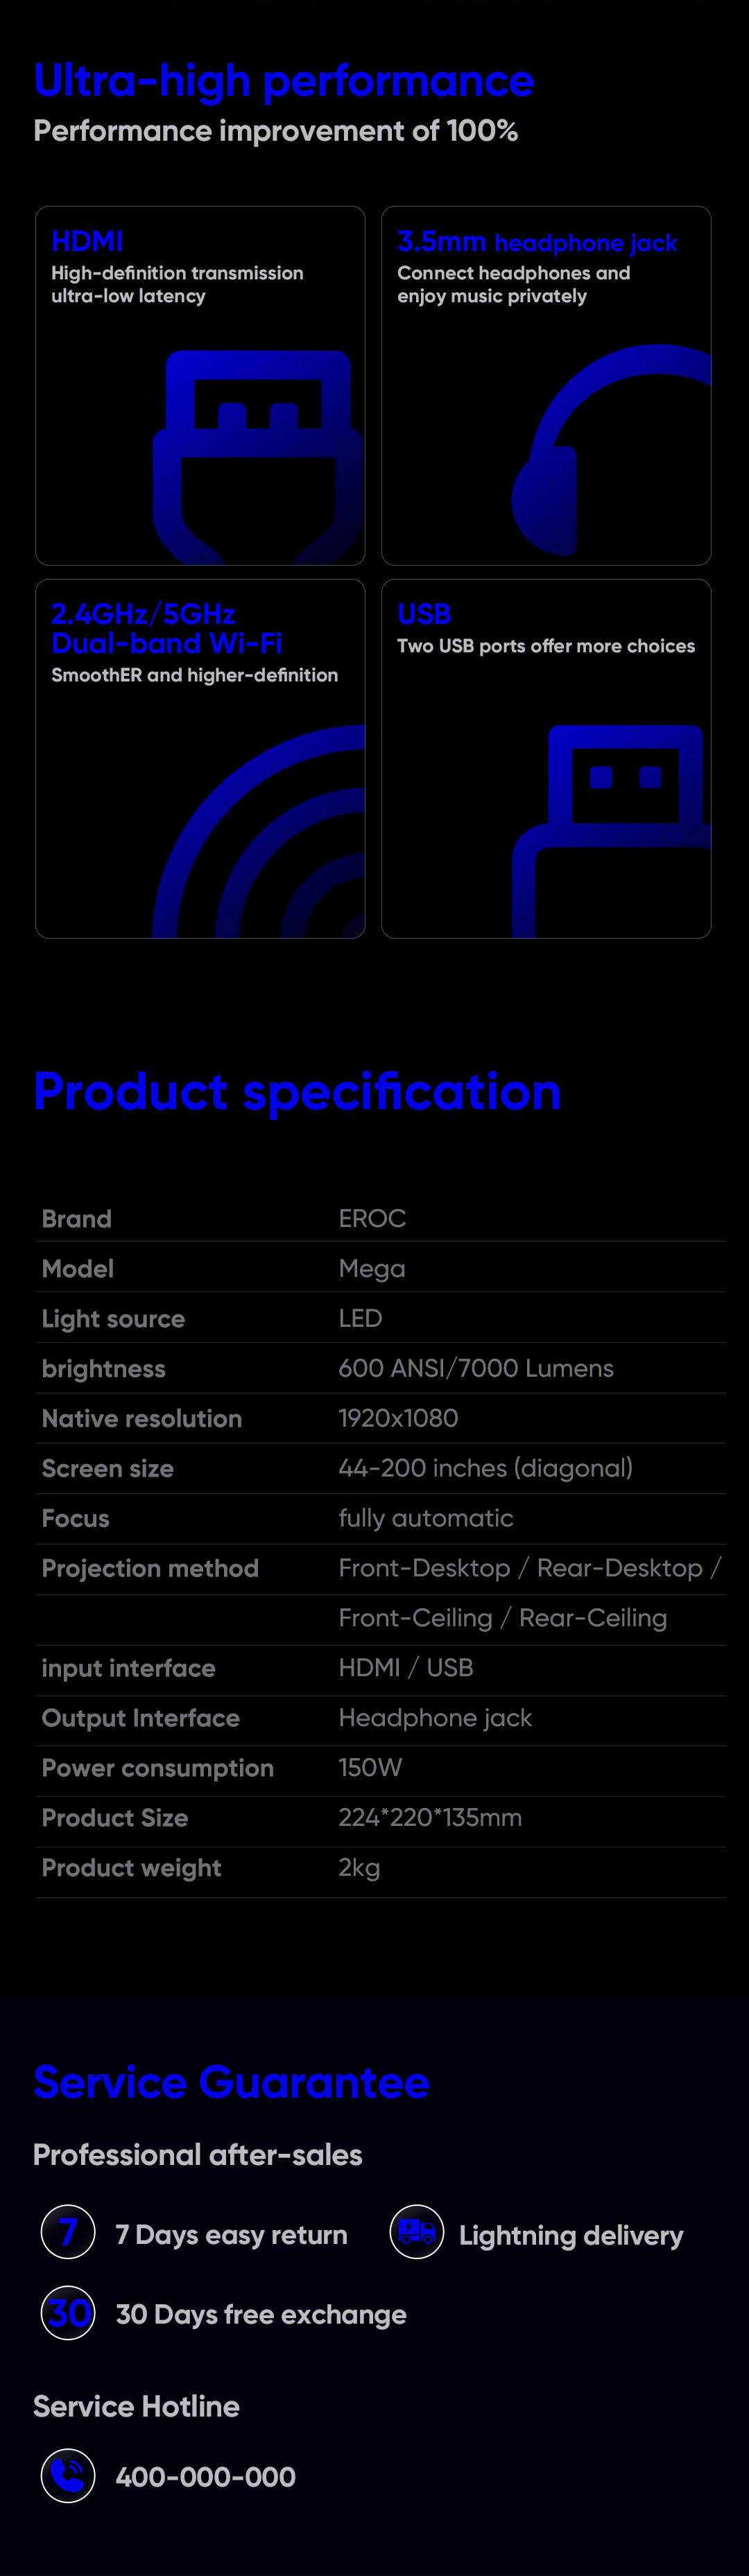 EROC - MEGA Projector Full HD 600 ANSI Android 9 OS 200 Screen BT5.0 Wifi 2.4 + 5G Fully Auto Focus